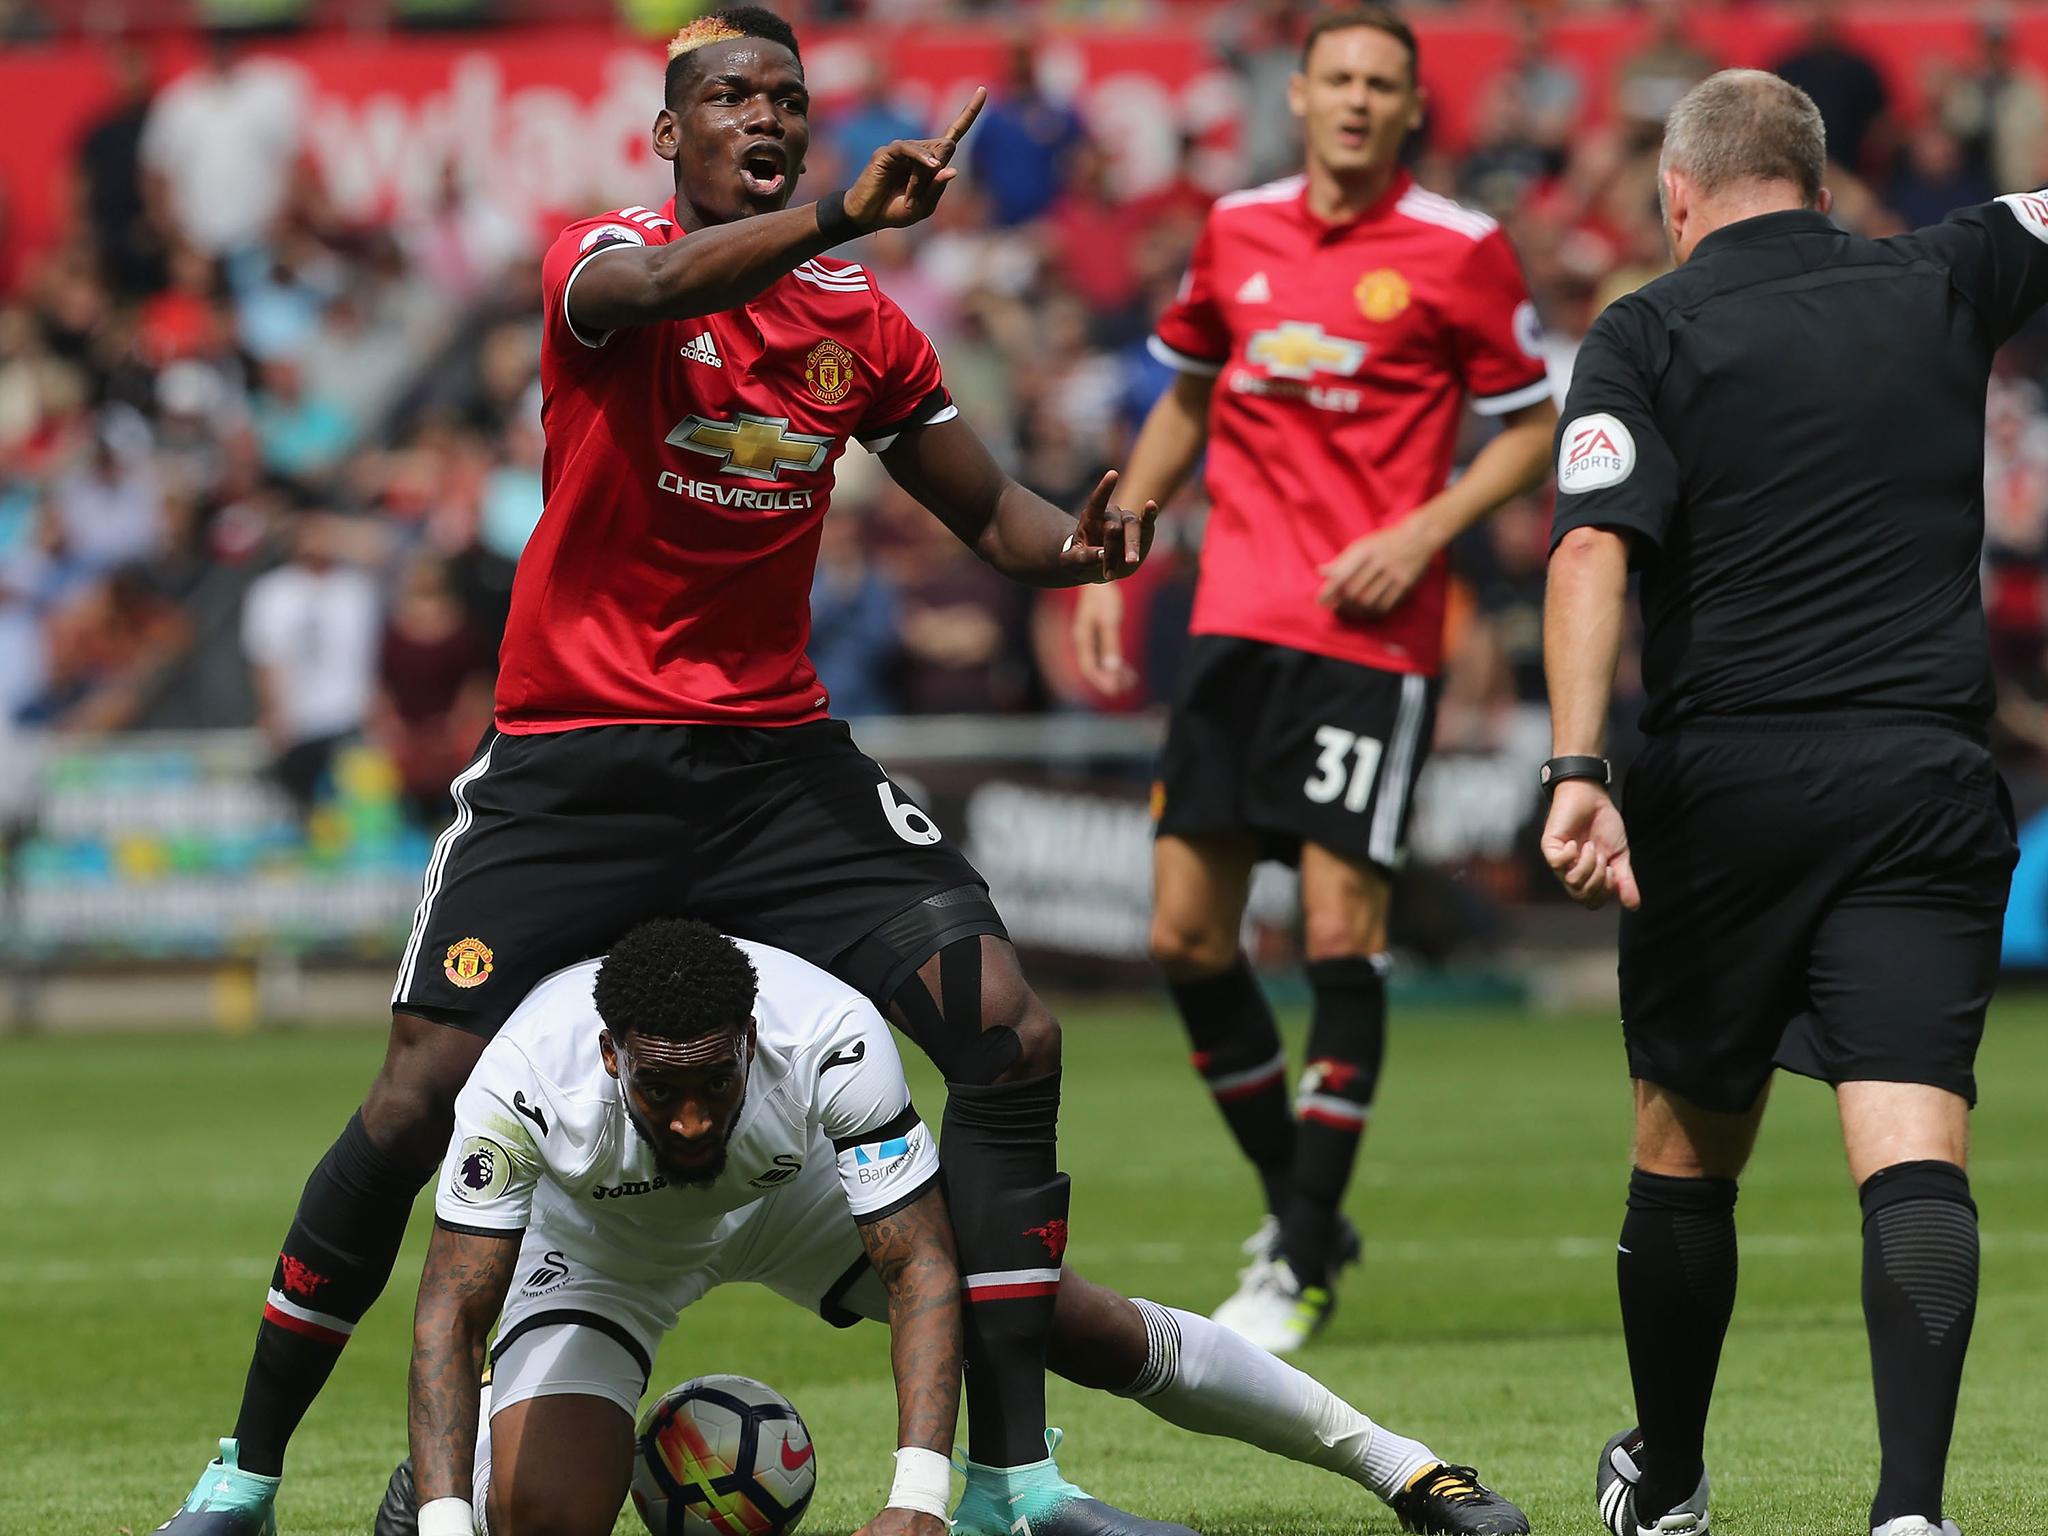 Paul Pogba appeals against receiving a booking after fouling Leroy Fer in Manchester United's win over Swansea